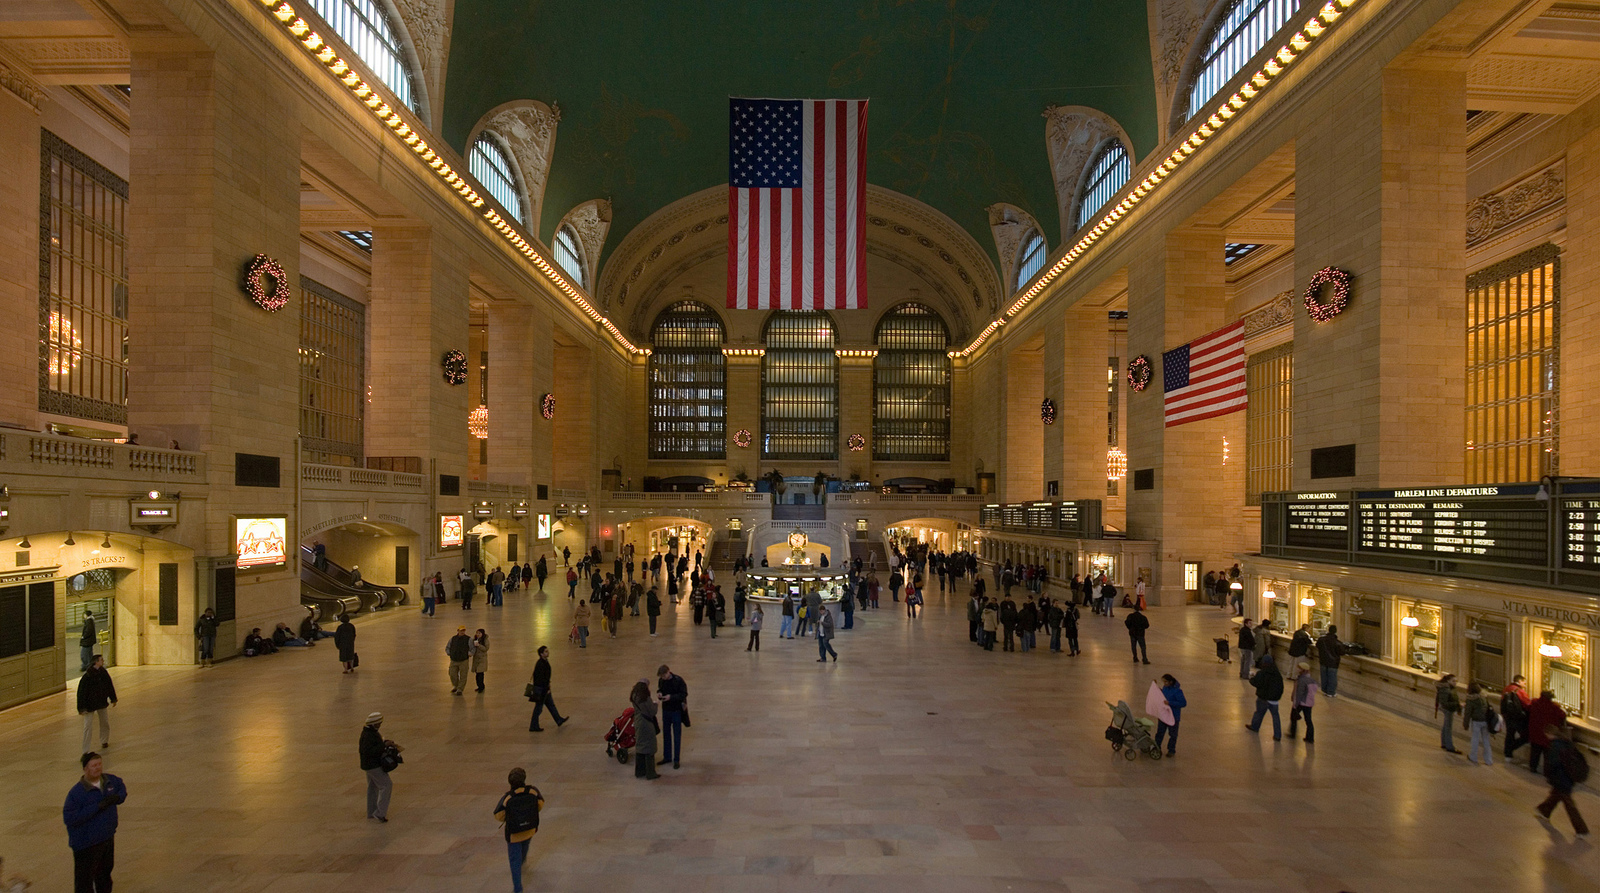 Grand_Central_Station_Main_Concourse_Jan_2006.jpg